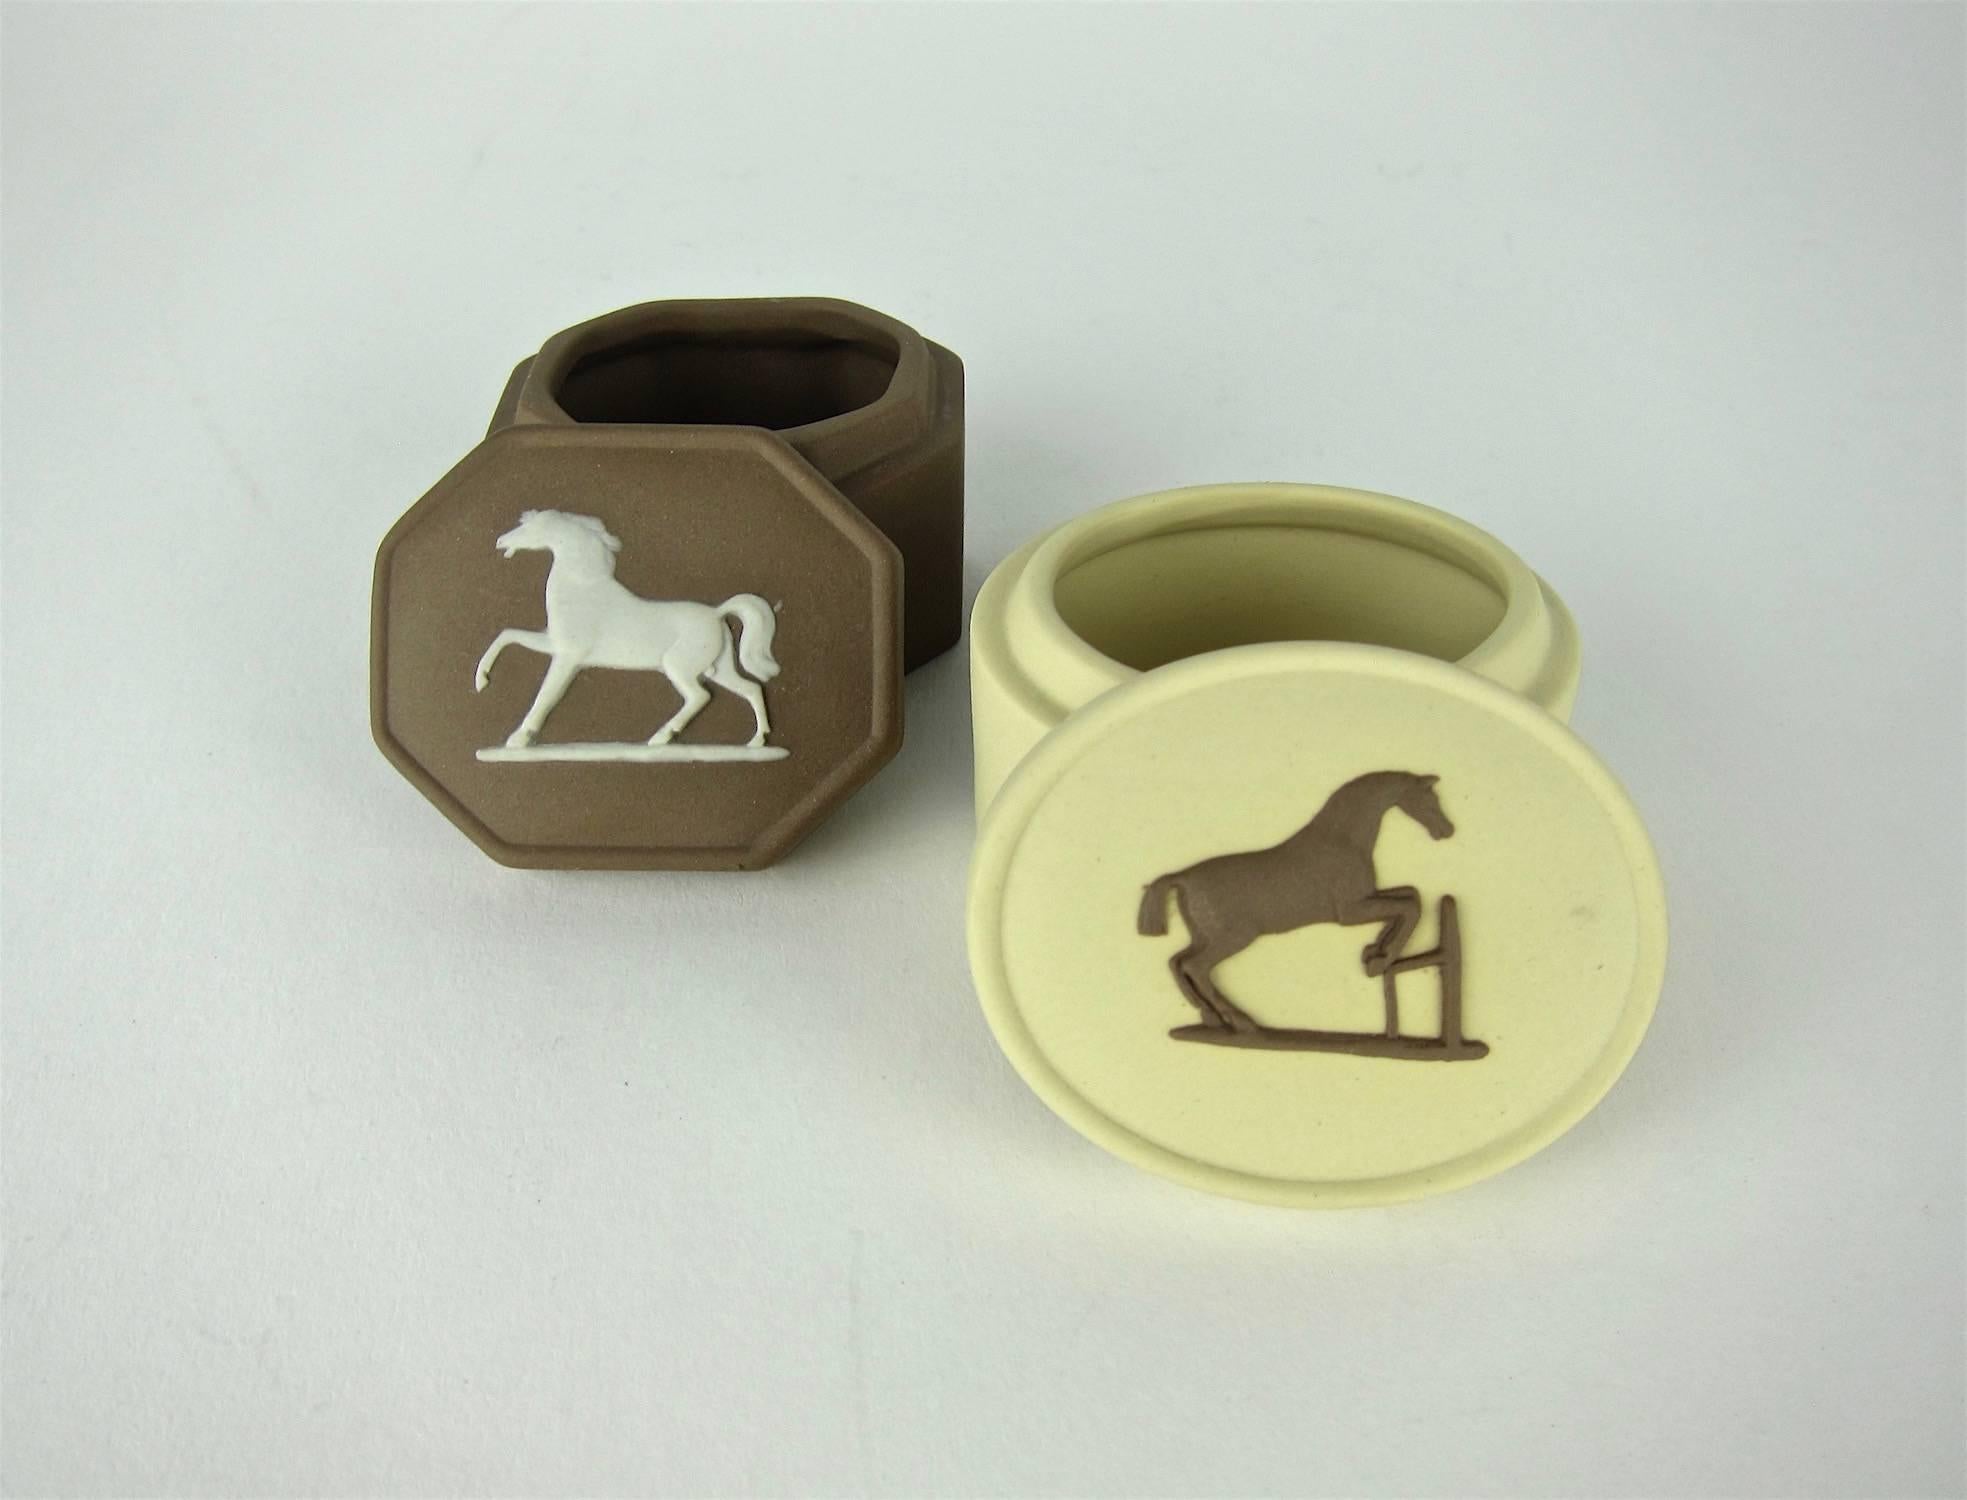 Two Wedgwood Equestrian boxes in solid Taupe and Primrose Jasper decorated with applied, bas-relief horse figures based on studies by painter, George Stubbs. Edward Burch R.A. modeled the horses for Josiah Wedgwood in the late 1780s. 

The octagonal